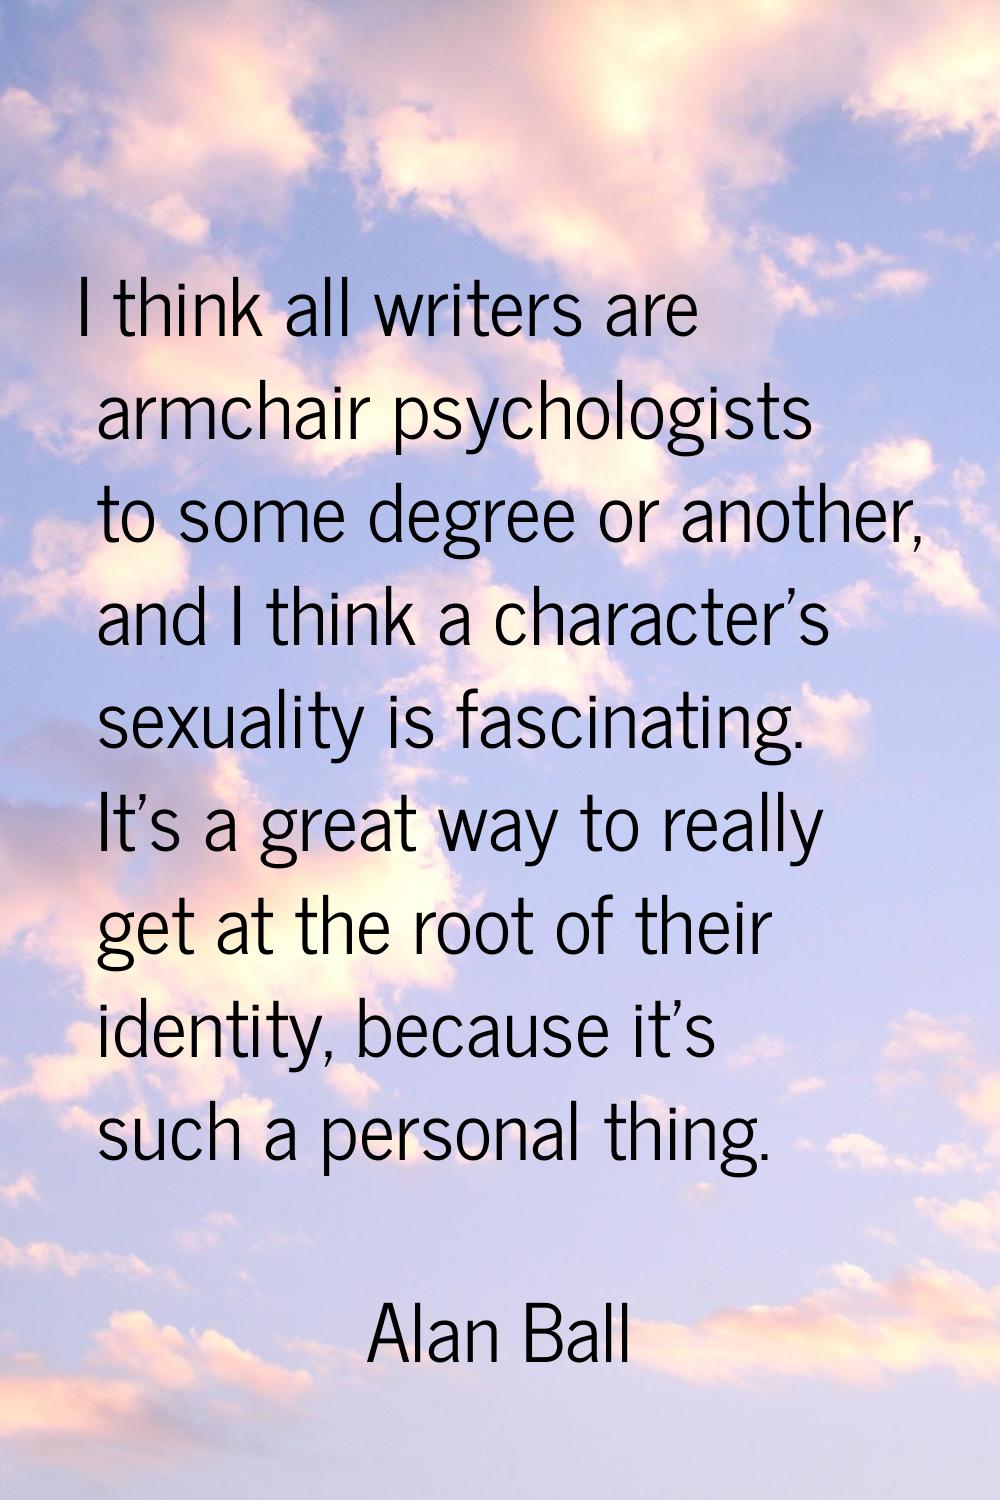 I think all writers are armchair psychologists to some degree or another, and I think a character's